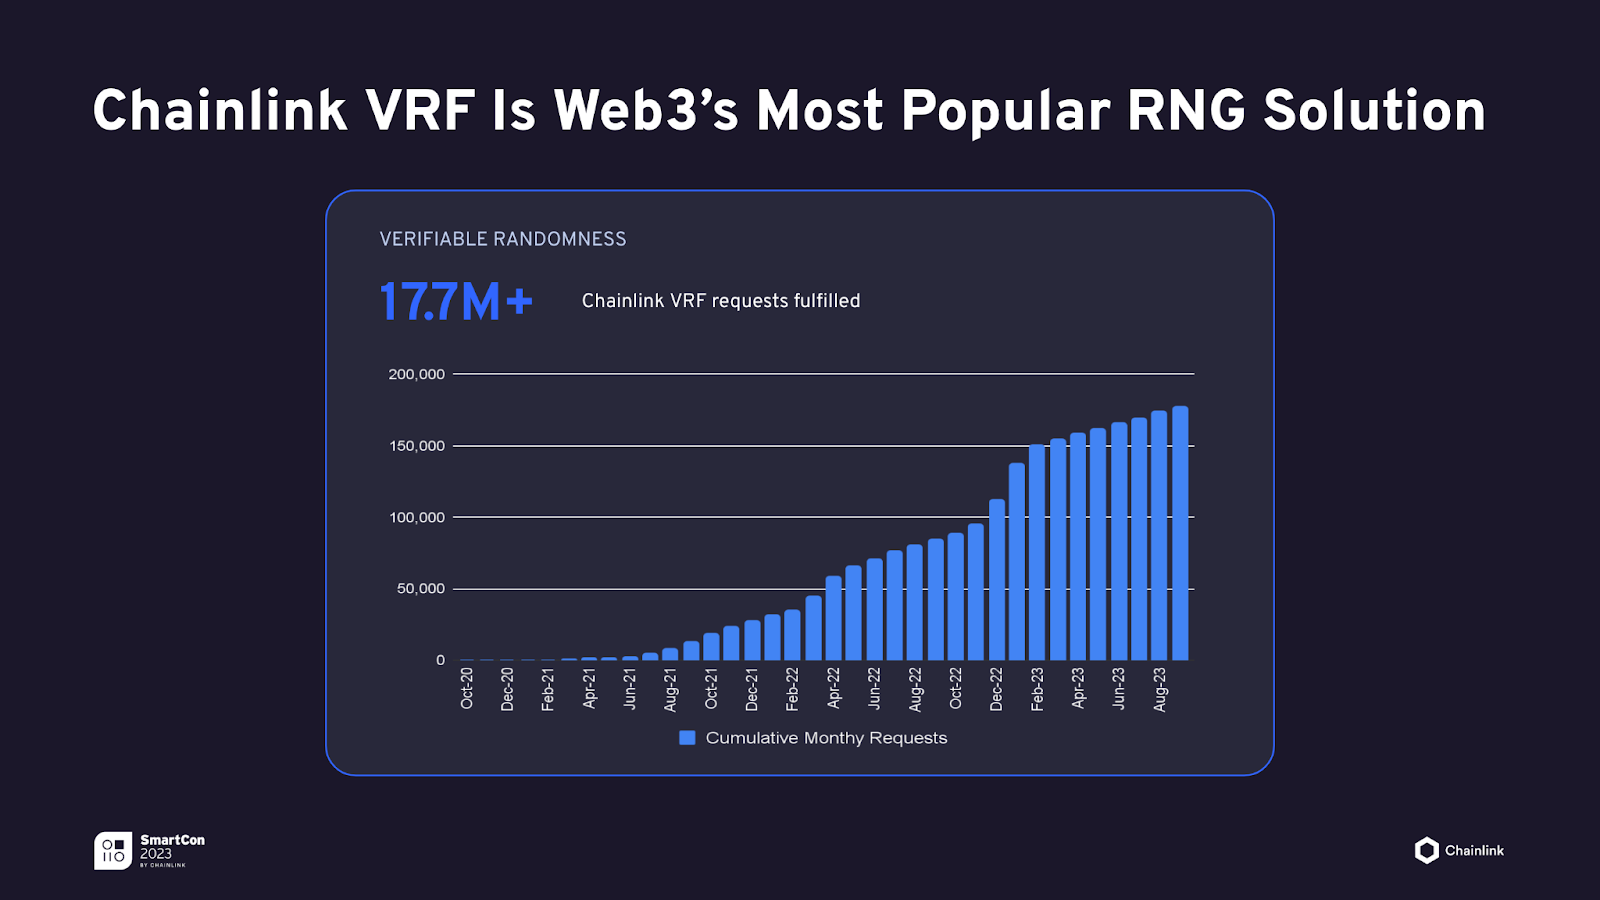 Chainlink VRF is Web3’s most popular RNG solution.